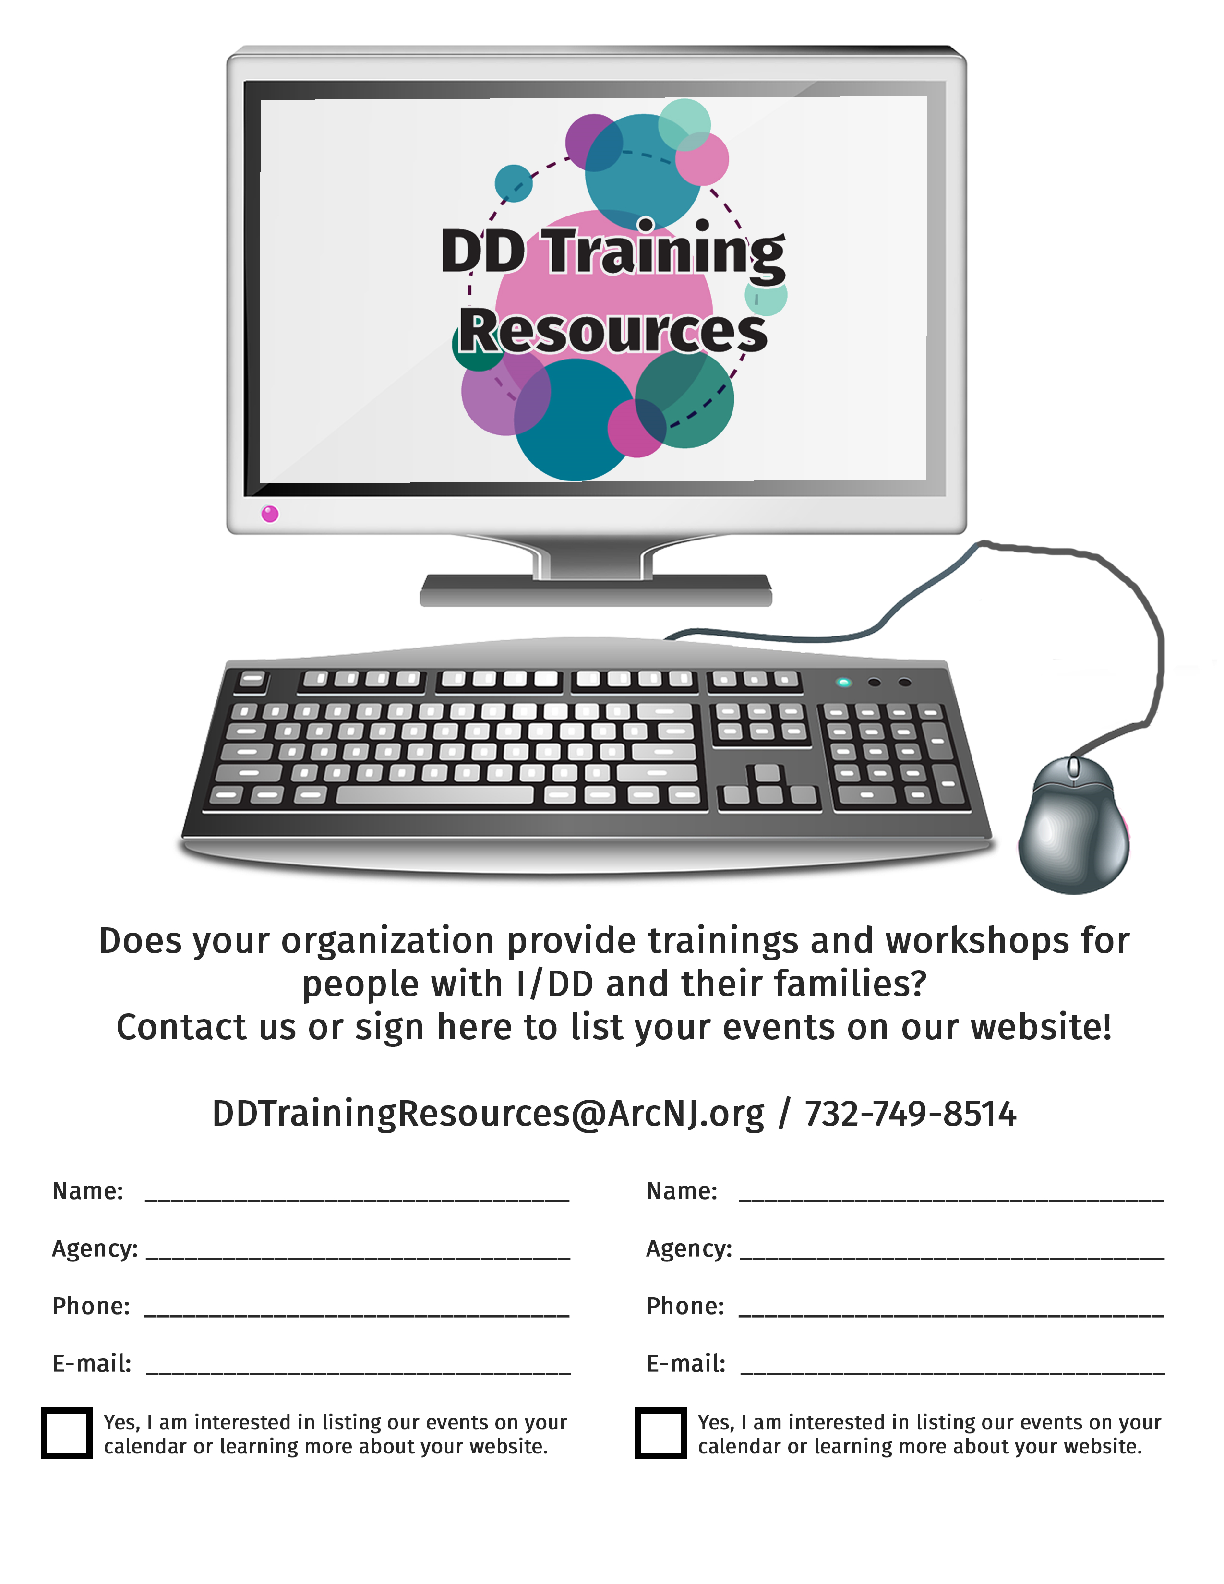 Does Your Organization Provide Trainings or Workshops?